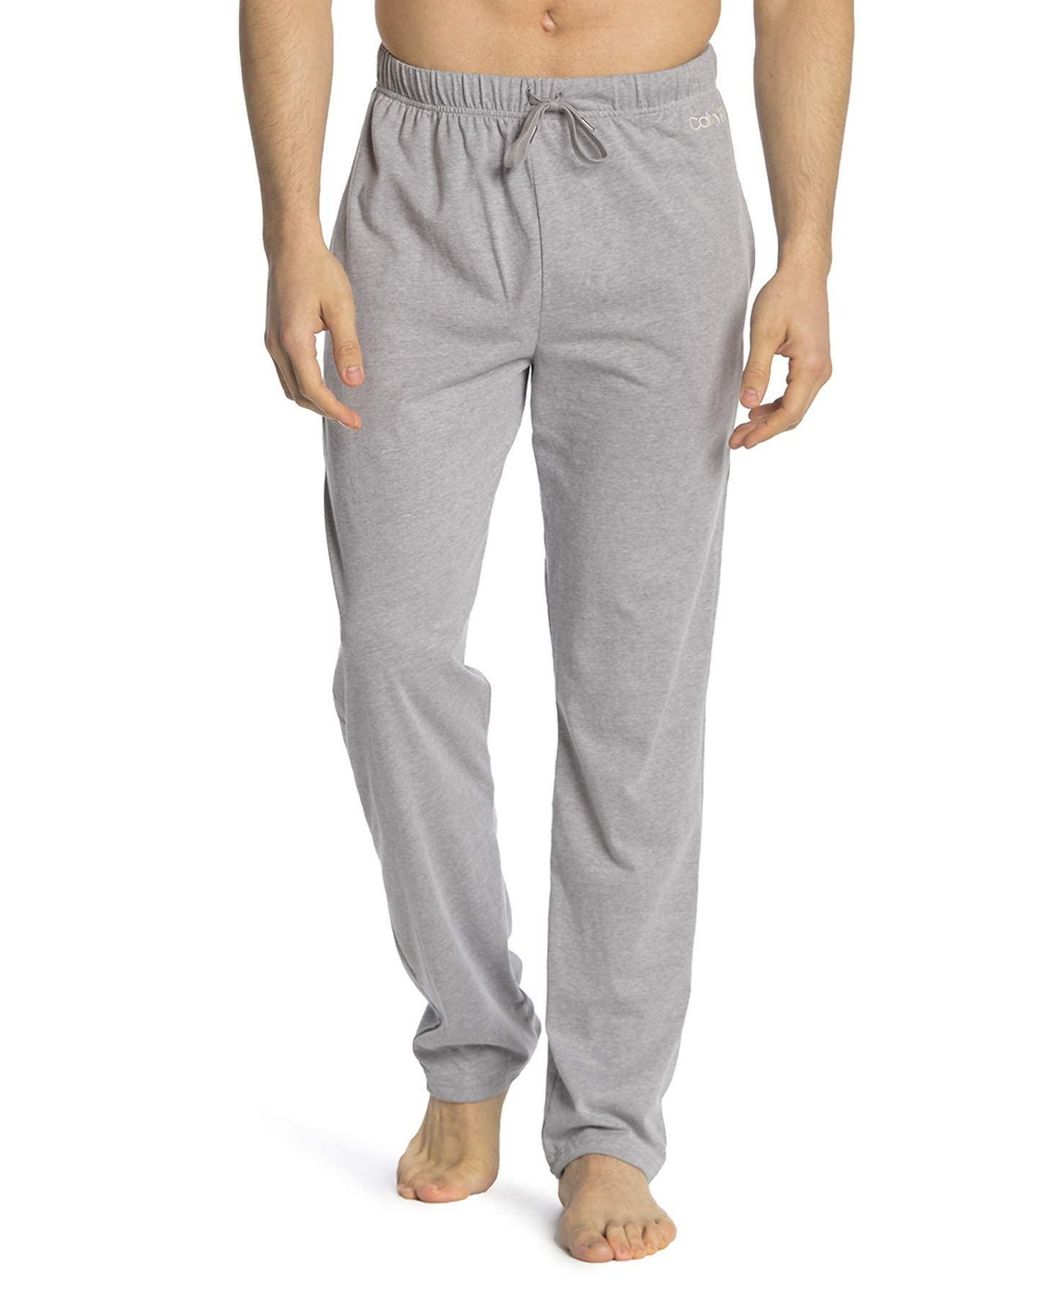 Calvin Klein Ck Chill Lounge Pant in Gray for Men